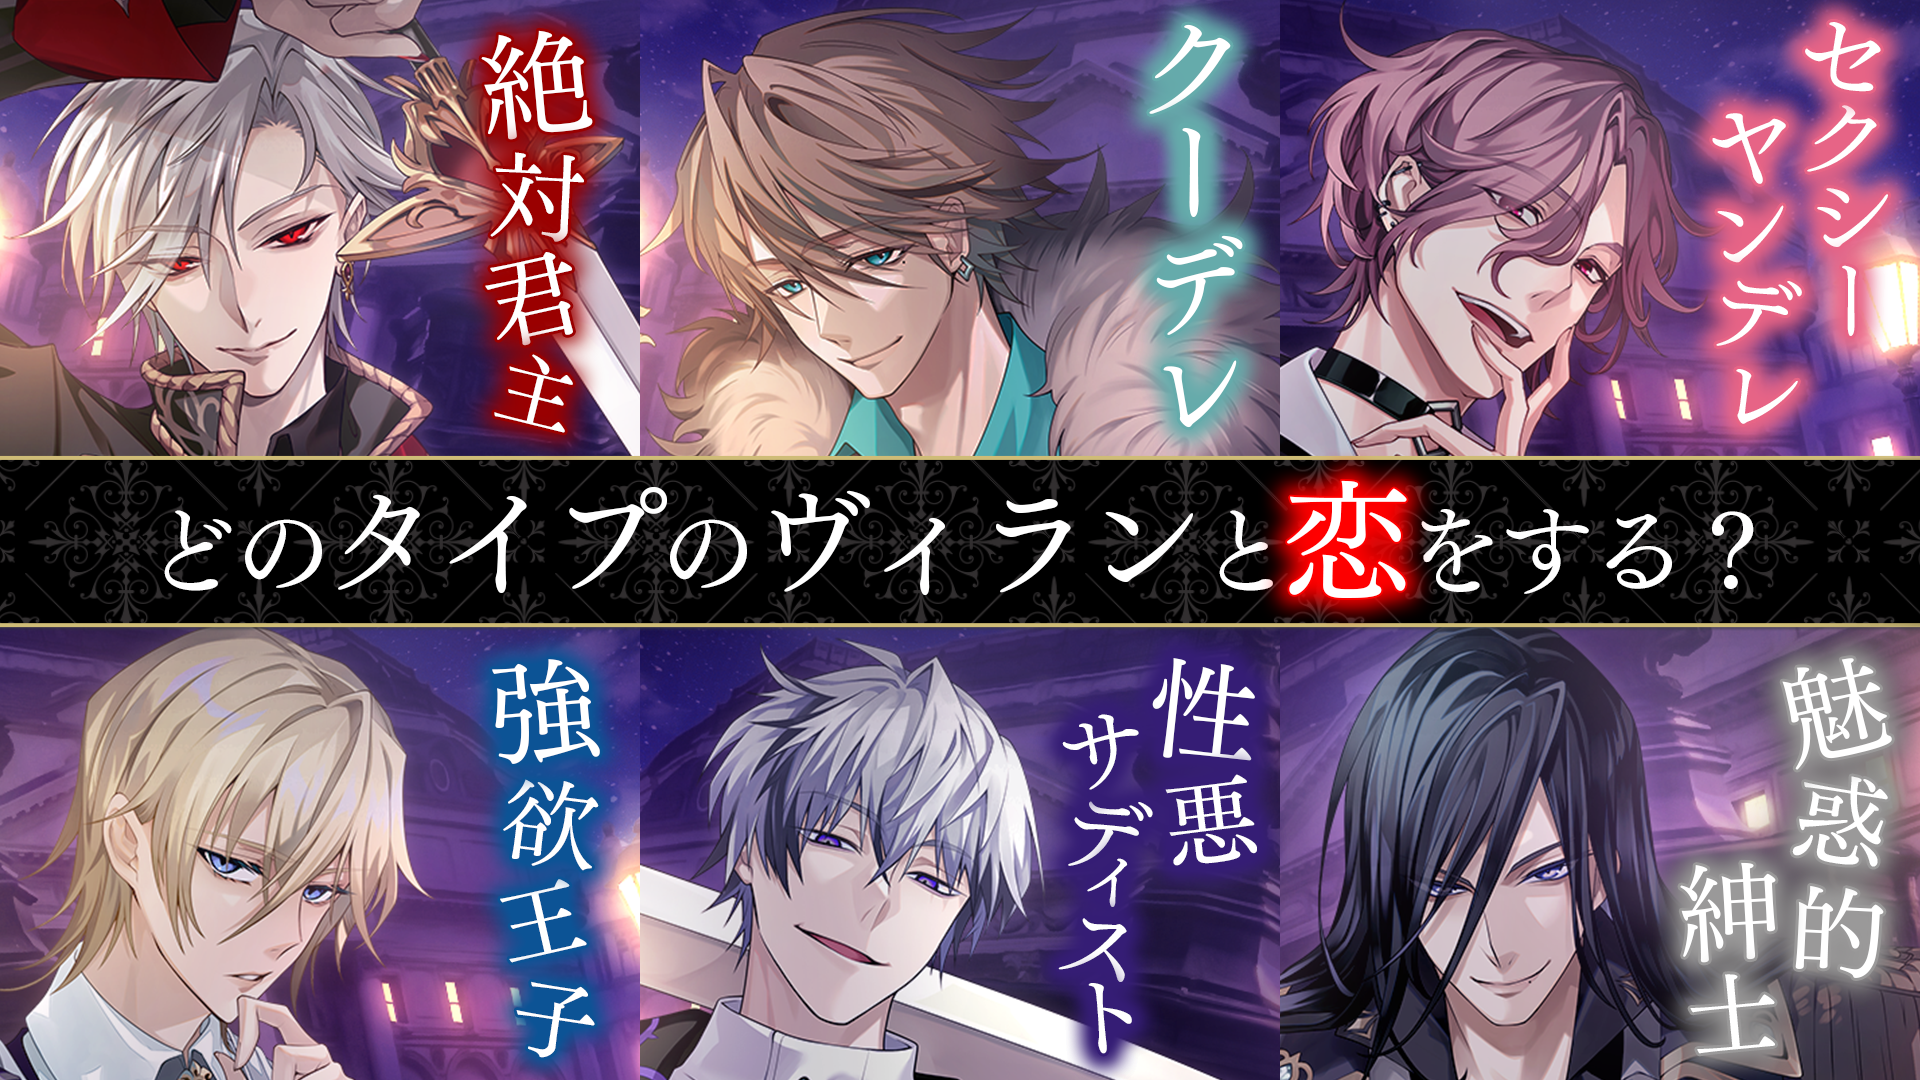 Screenshot 1 of Handsome villain Evil love that opens in the dark night Romance game Otome game 2.1.0